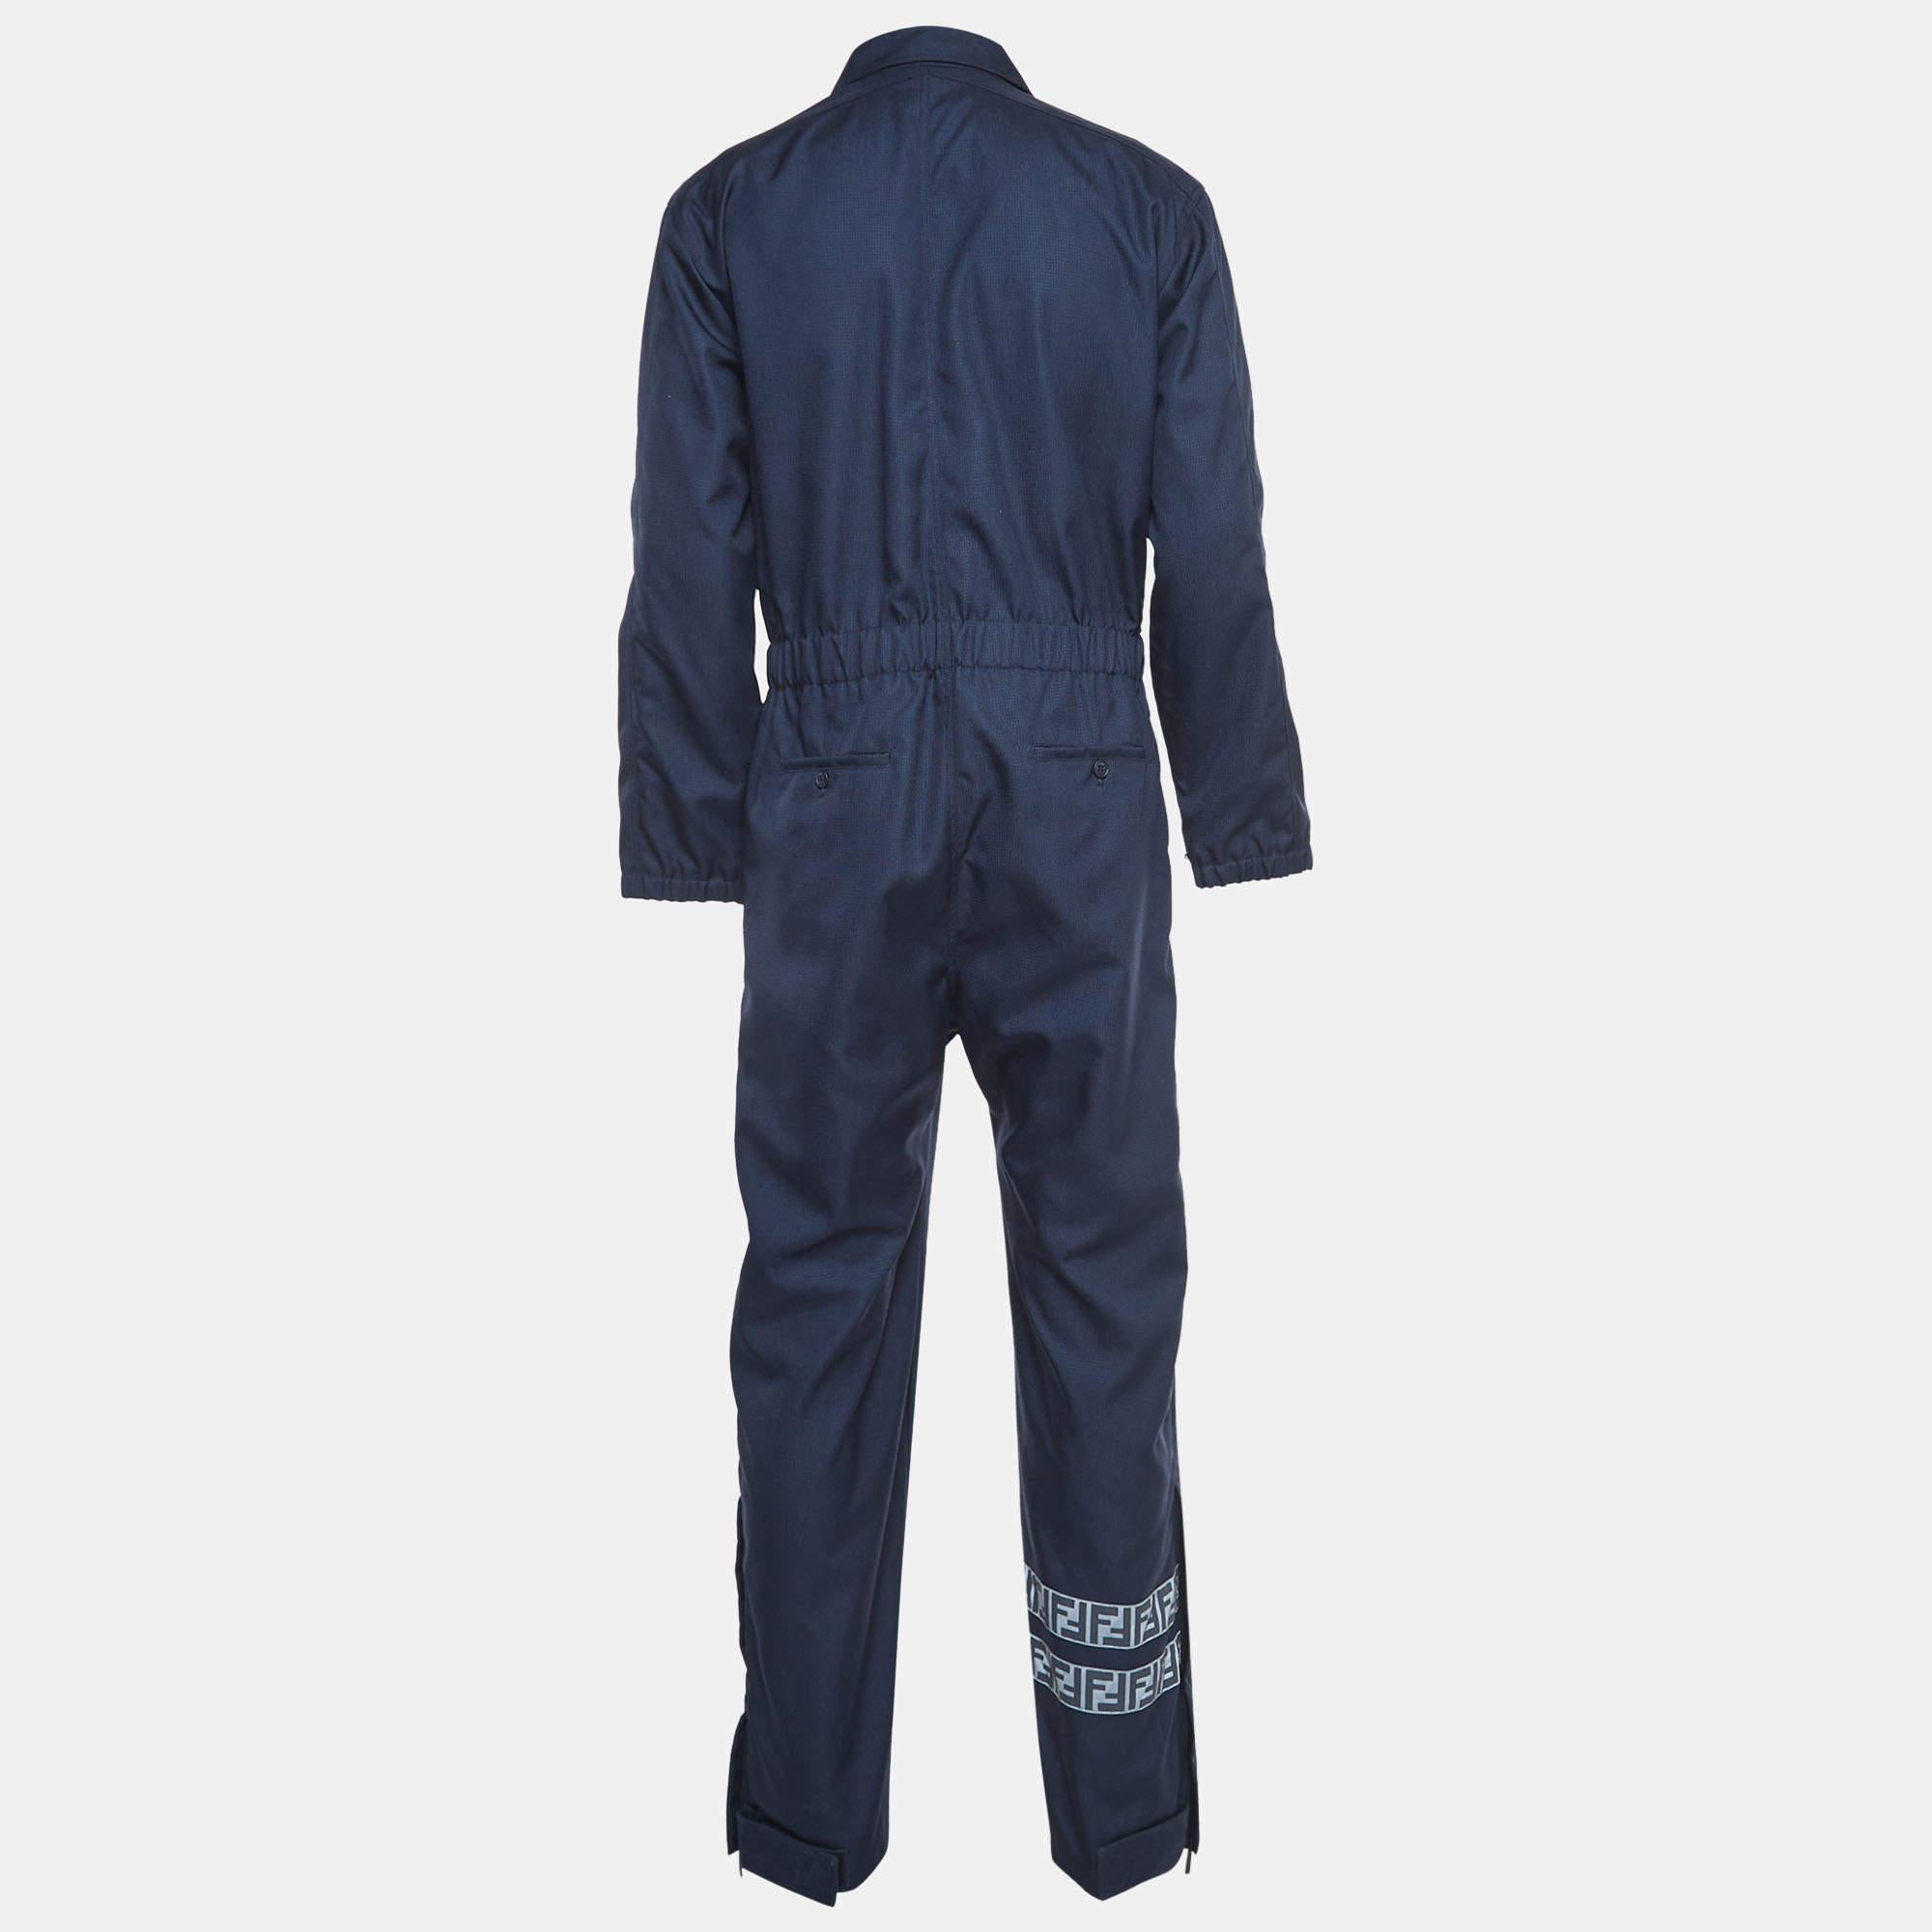 The Fendi jumpsuit is a sleek, contemporary one-piece garment crafted from high-quality nylon. Featuring a tailored fit, multiple utility pockets, and the iconic Fendi logo, it combines functionality with elevated style for a fashion-forward